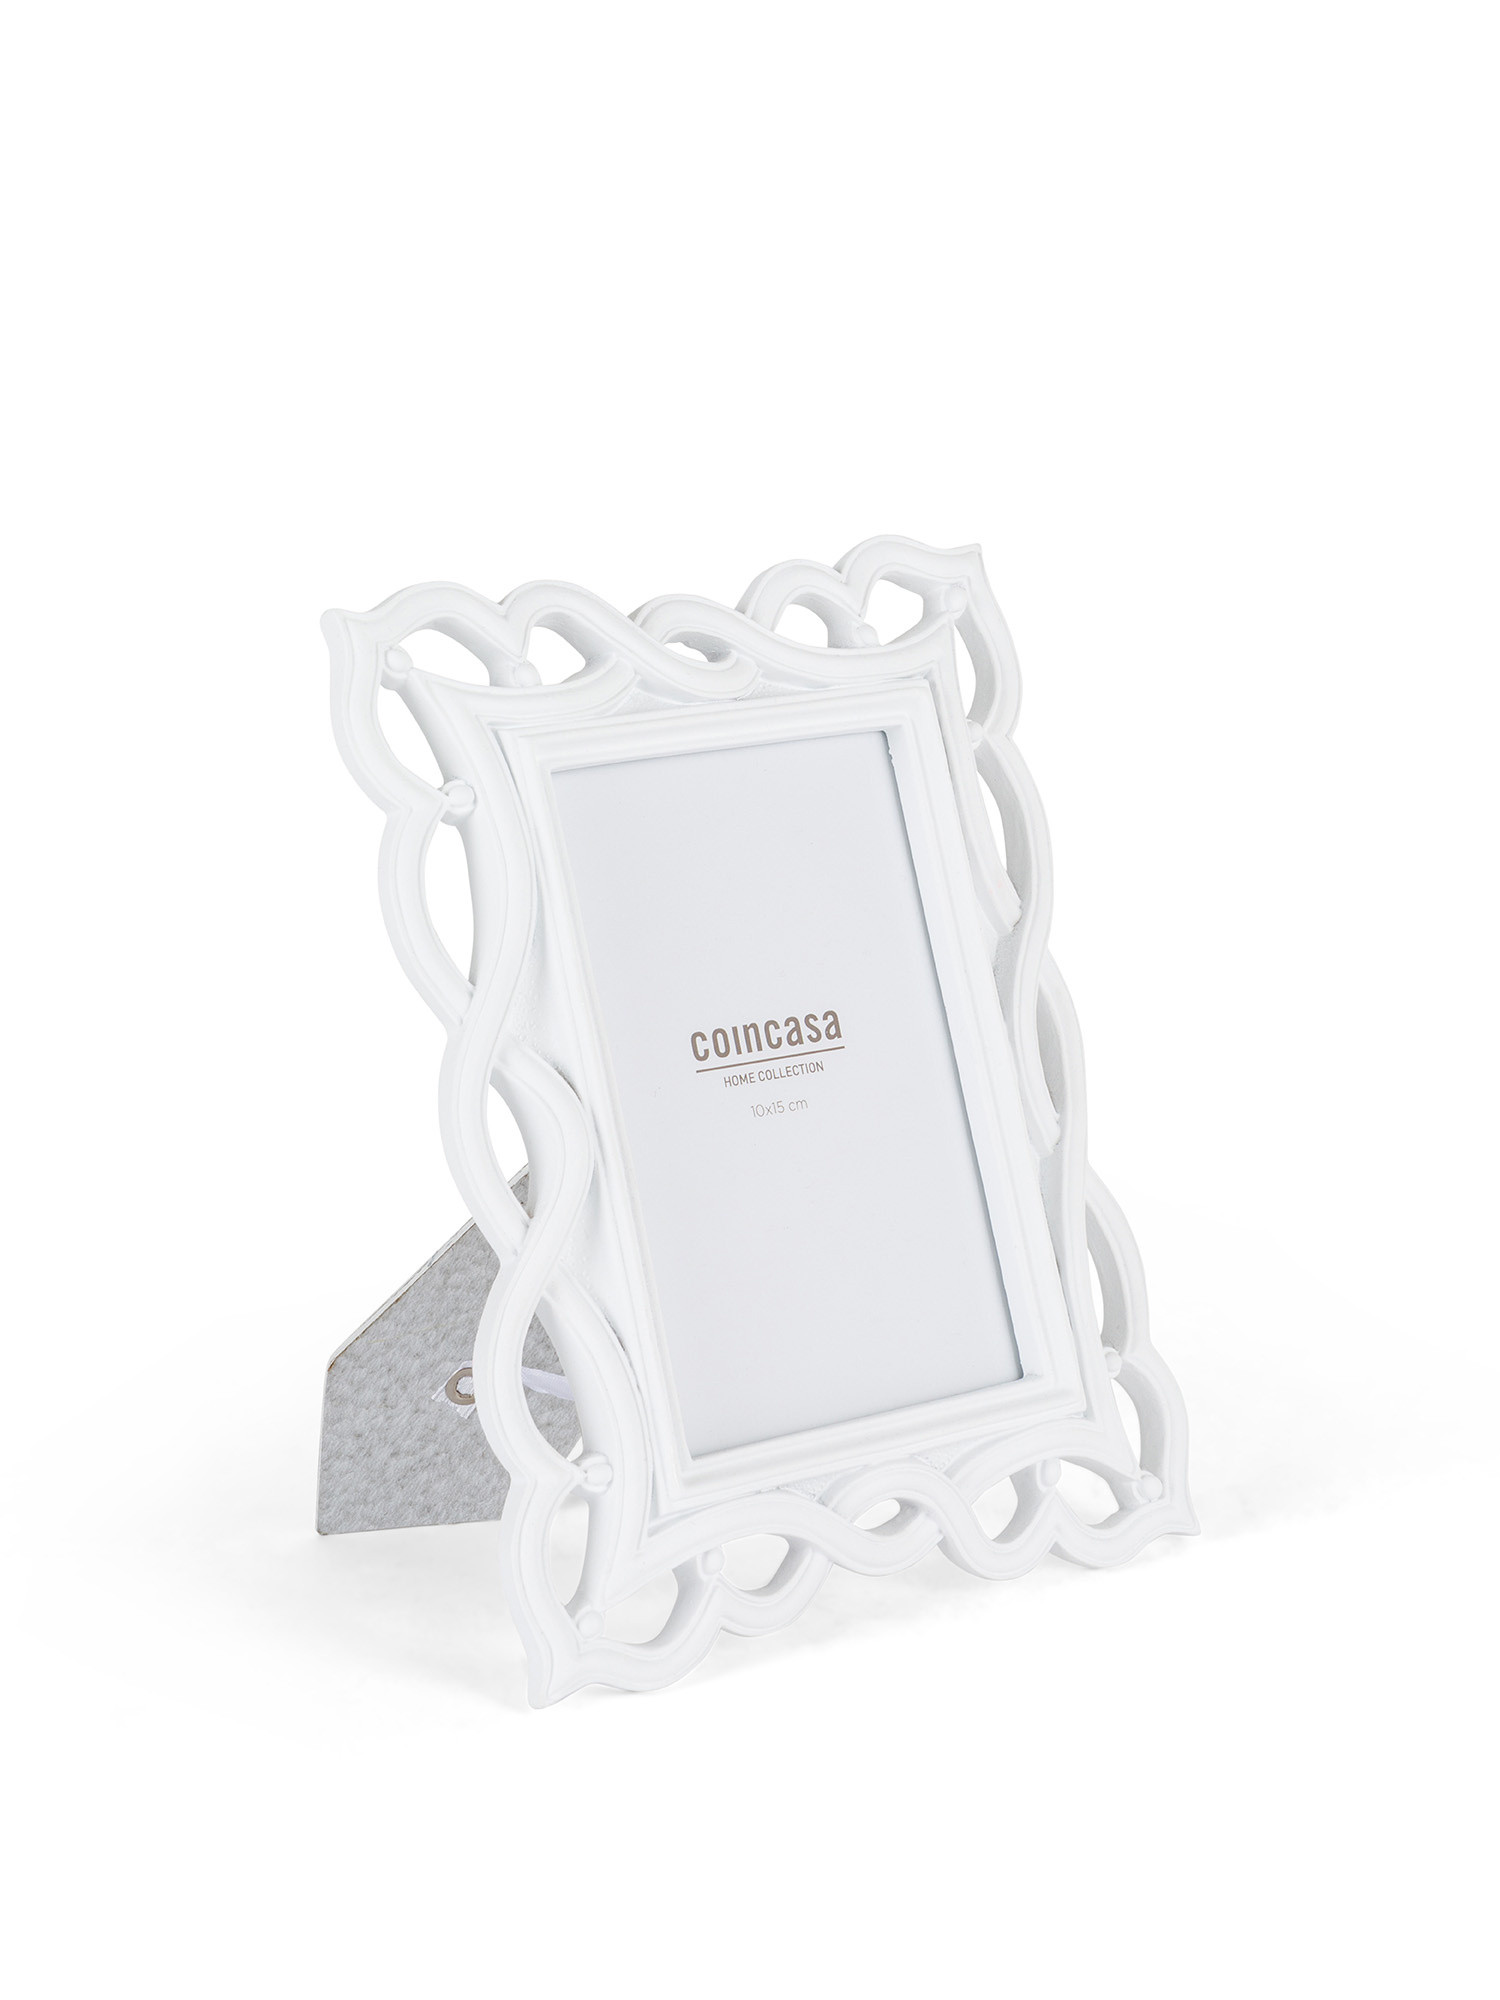 Photo frame with resin frame, White, large image number 0